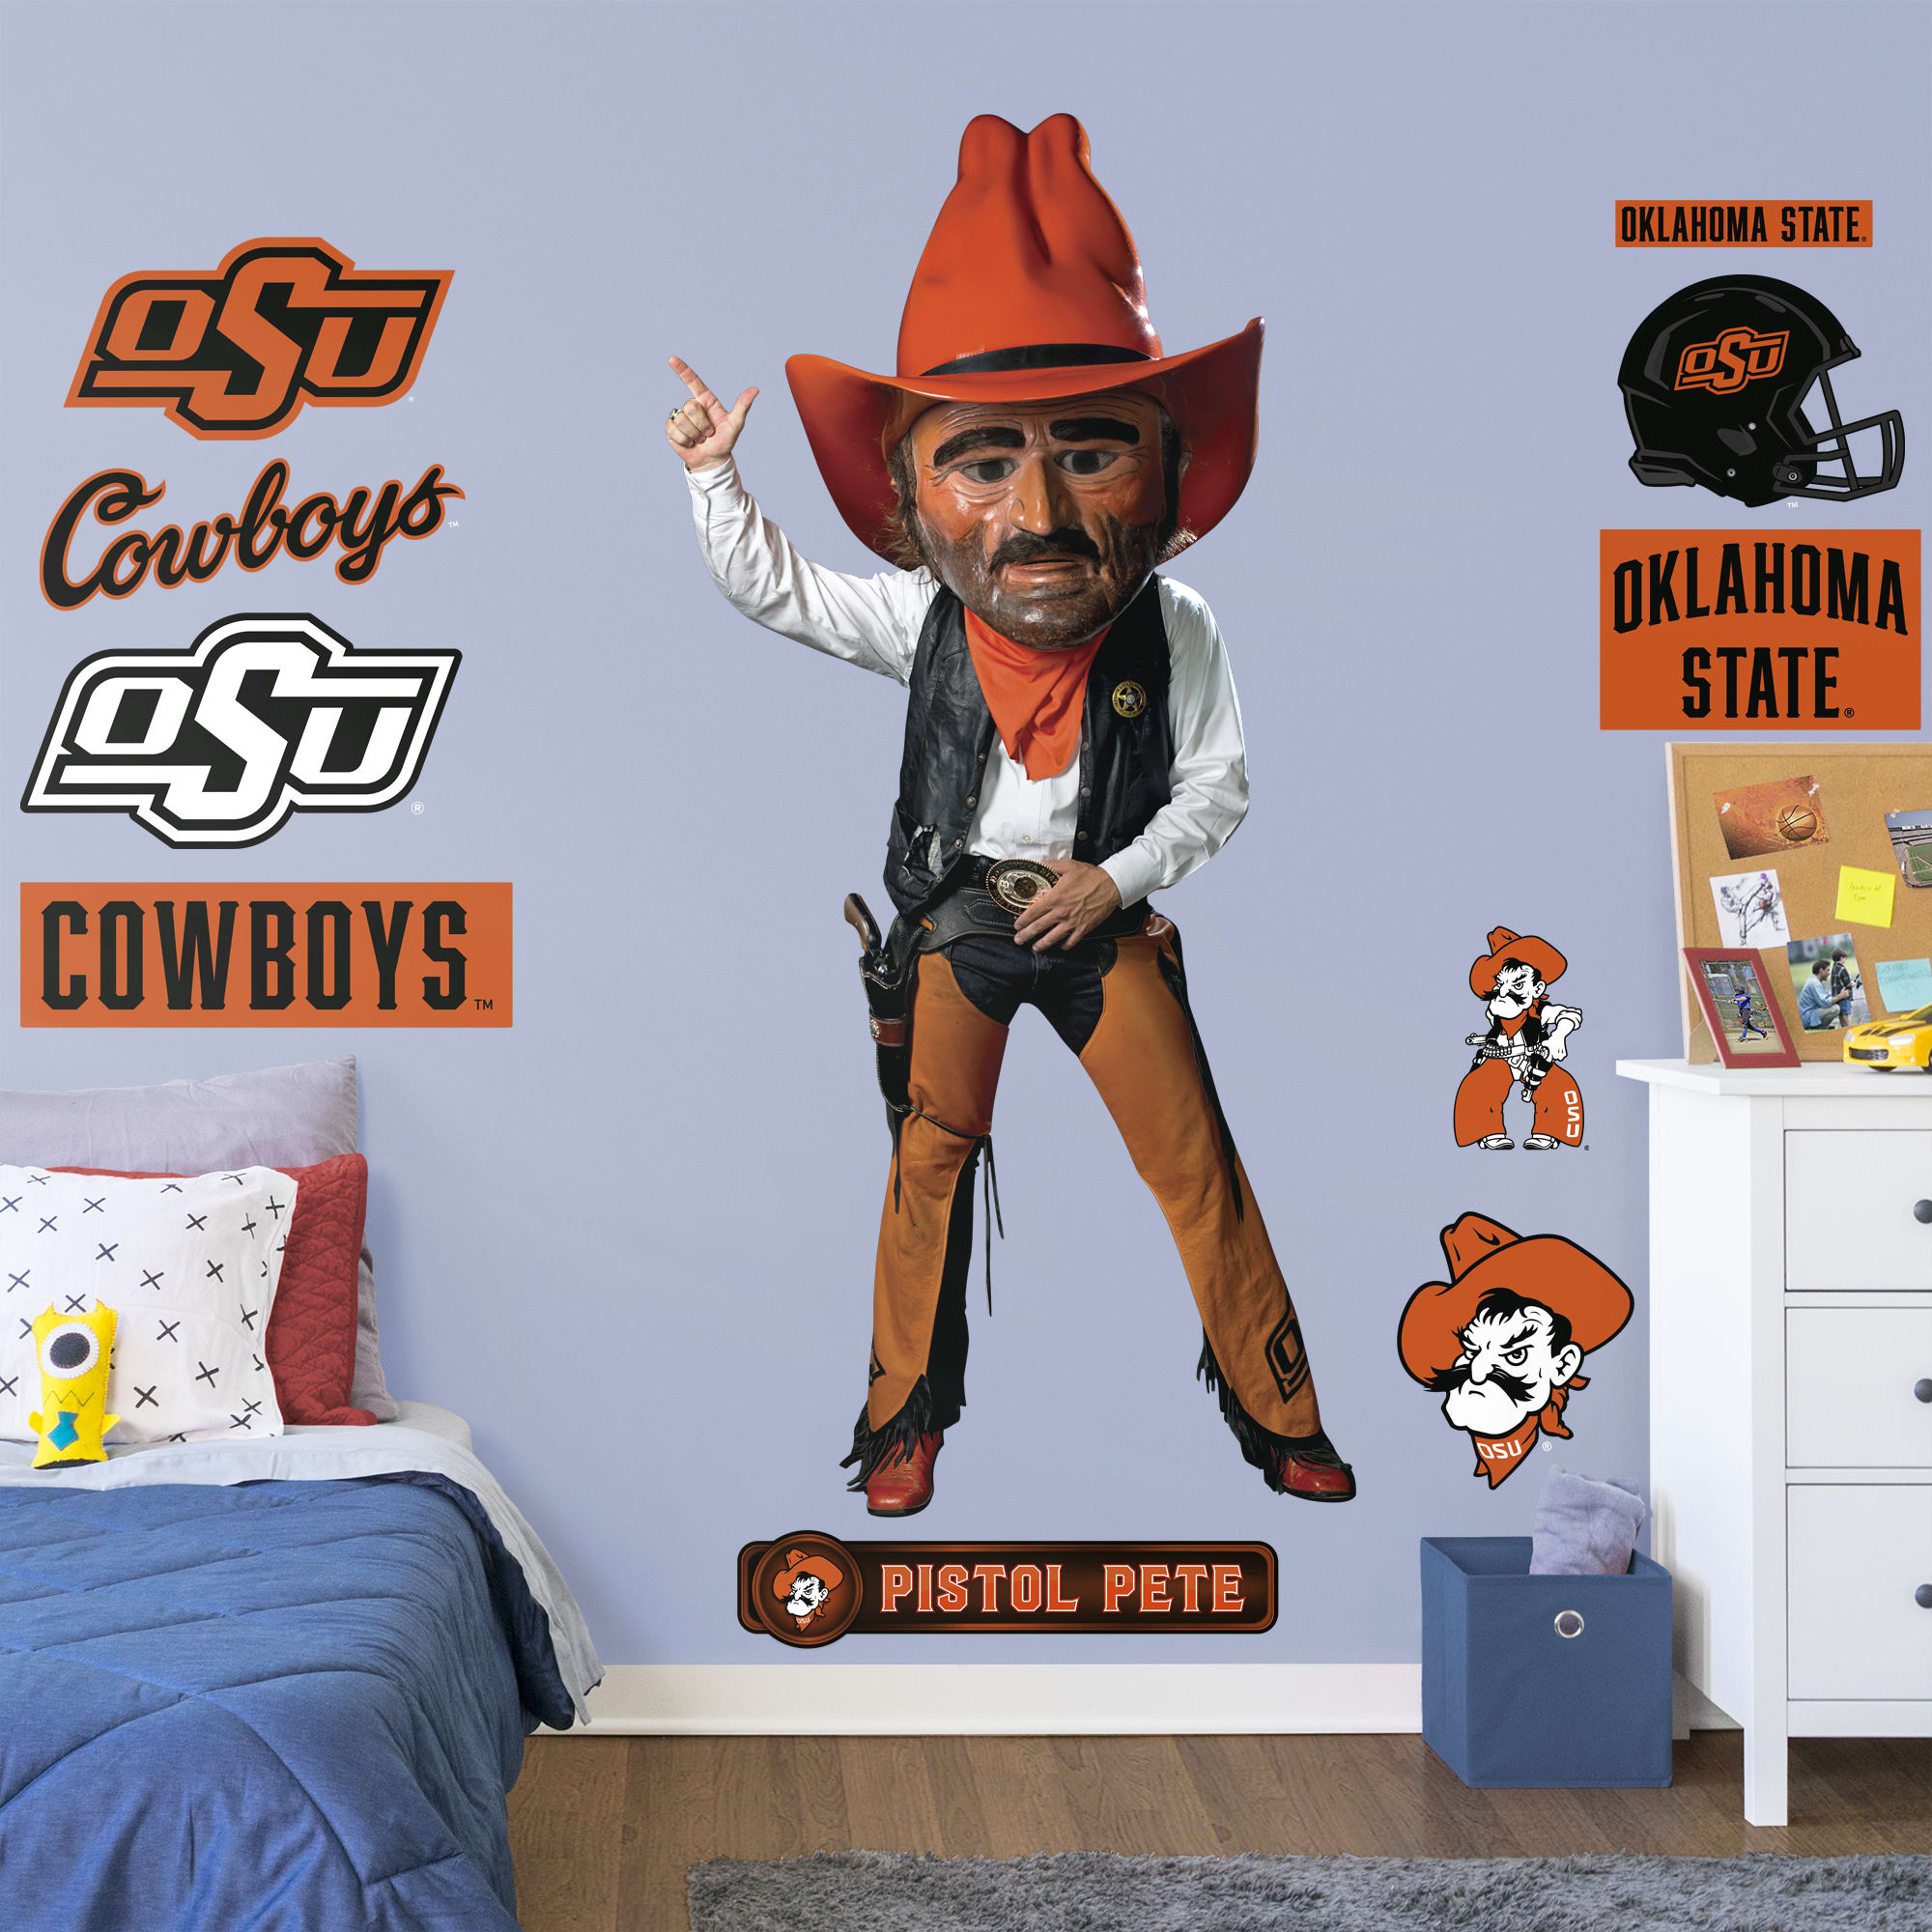 Oklahoma State Cowboys: Pistol Pete Mascot - Officially Licensed Removable Wall Decal Life-Size Character + 10 Decals (58"W x 30